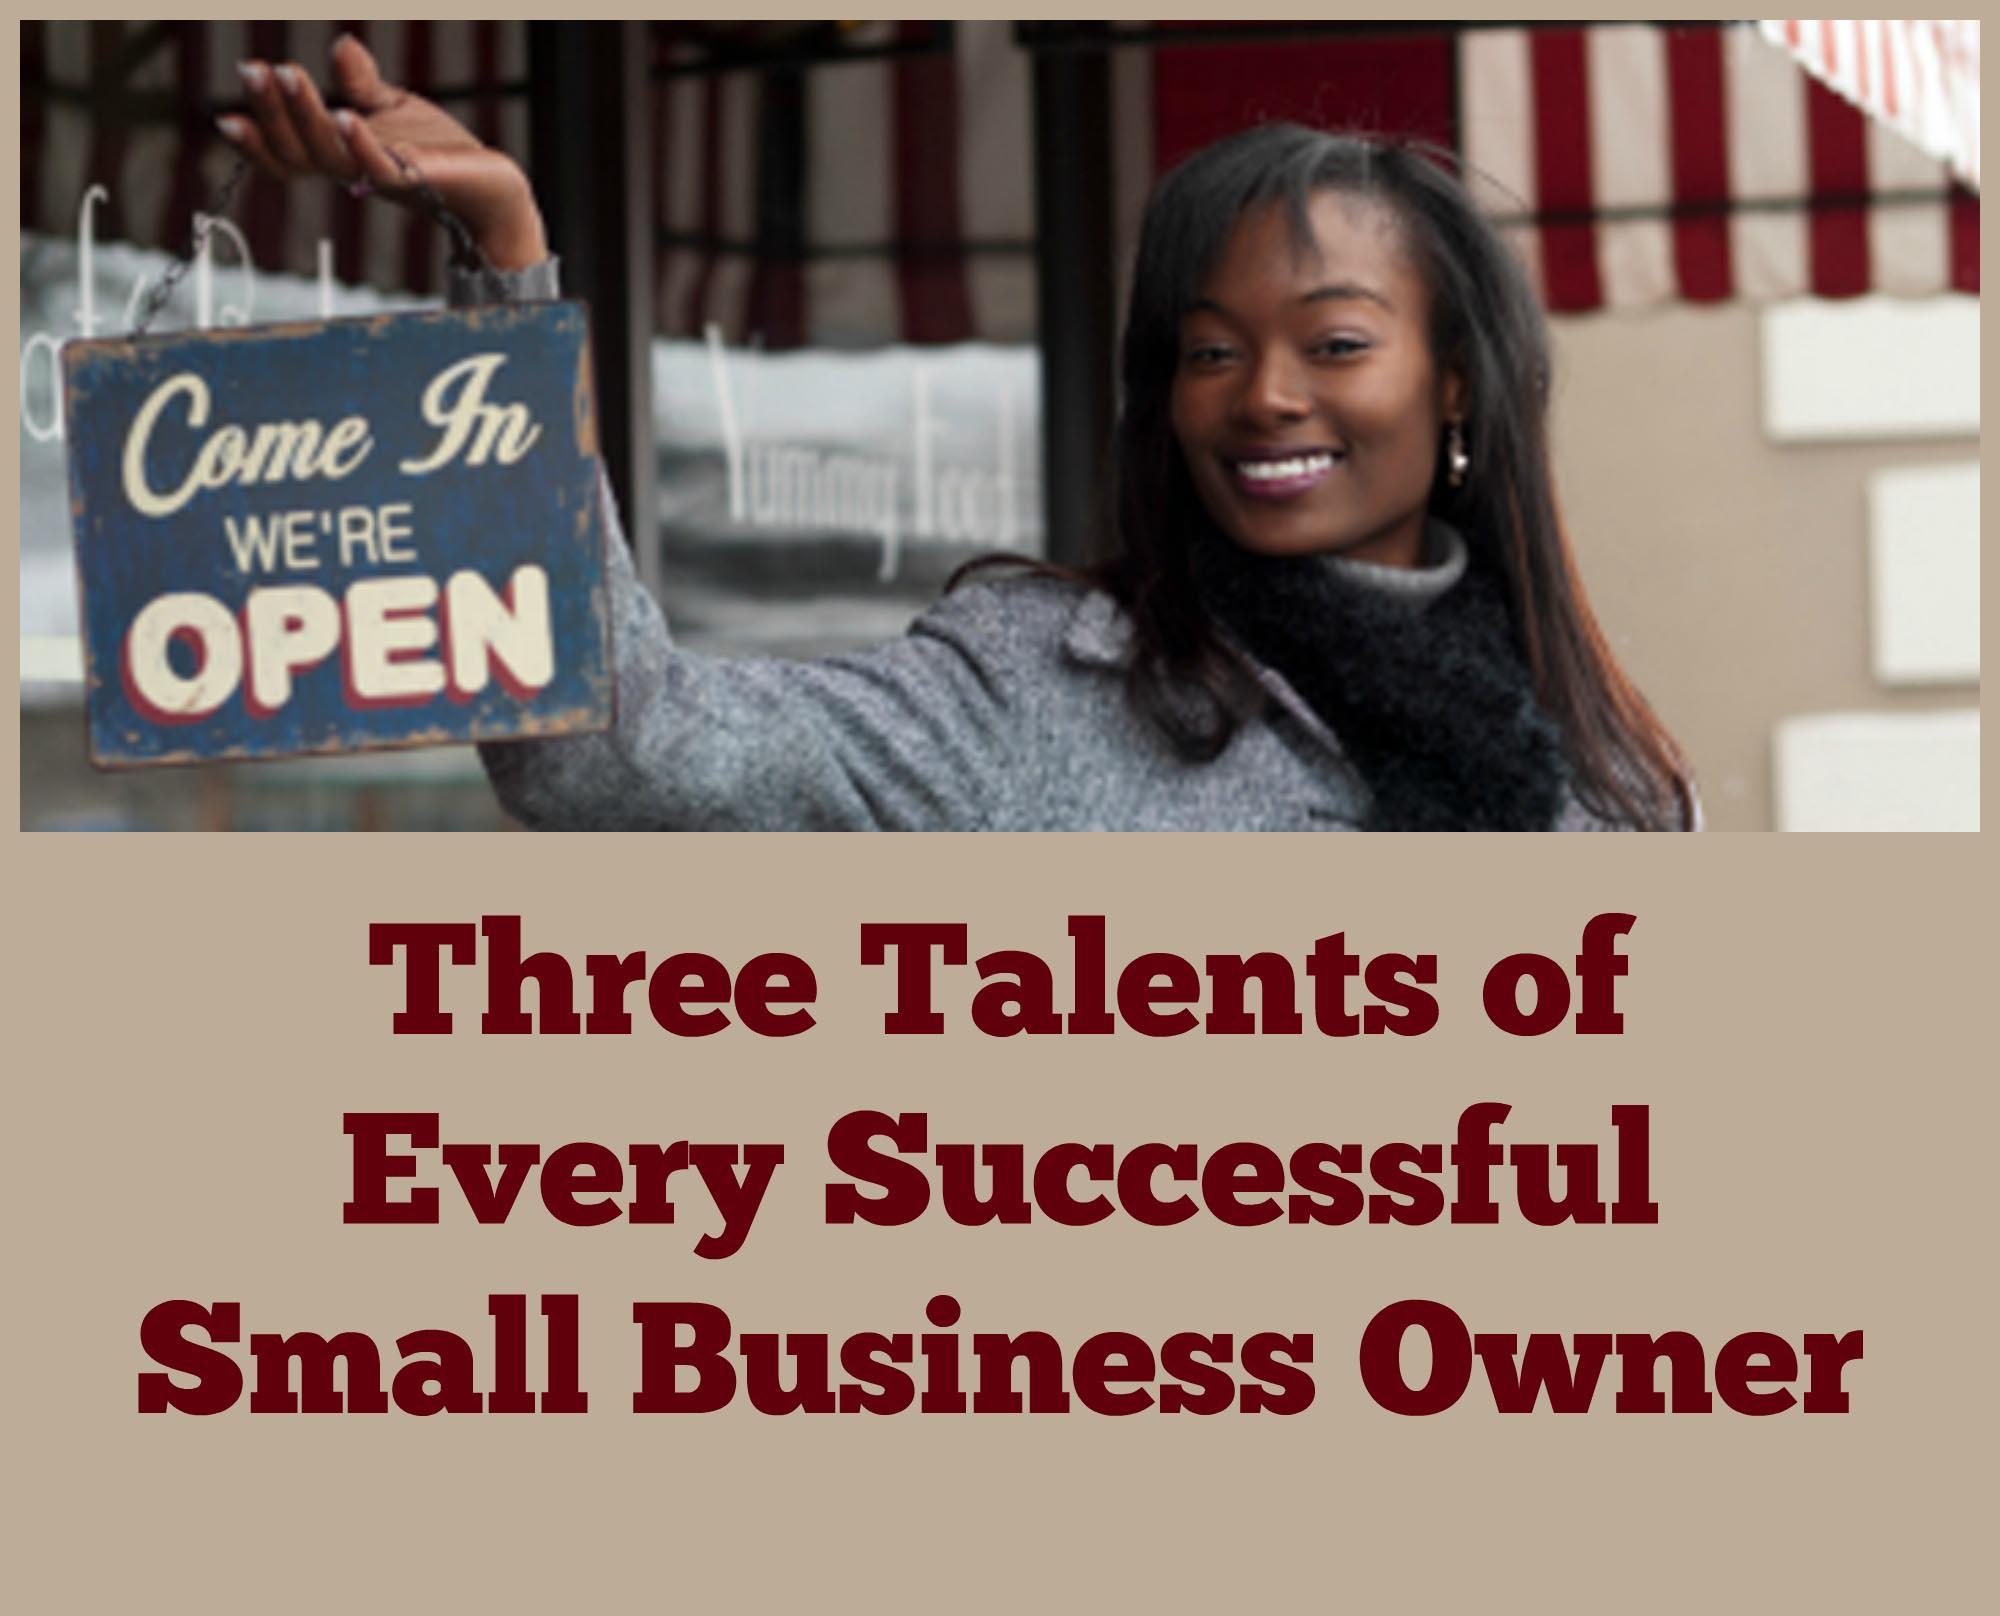 Three Talents of Every Successful Small Business Owner